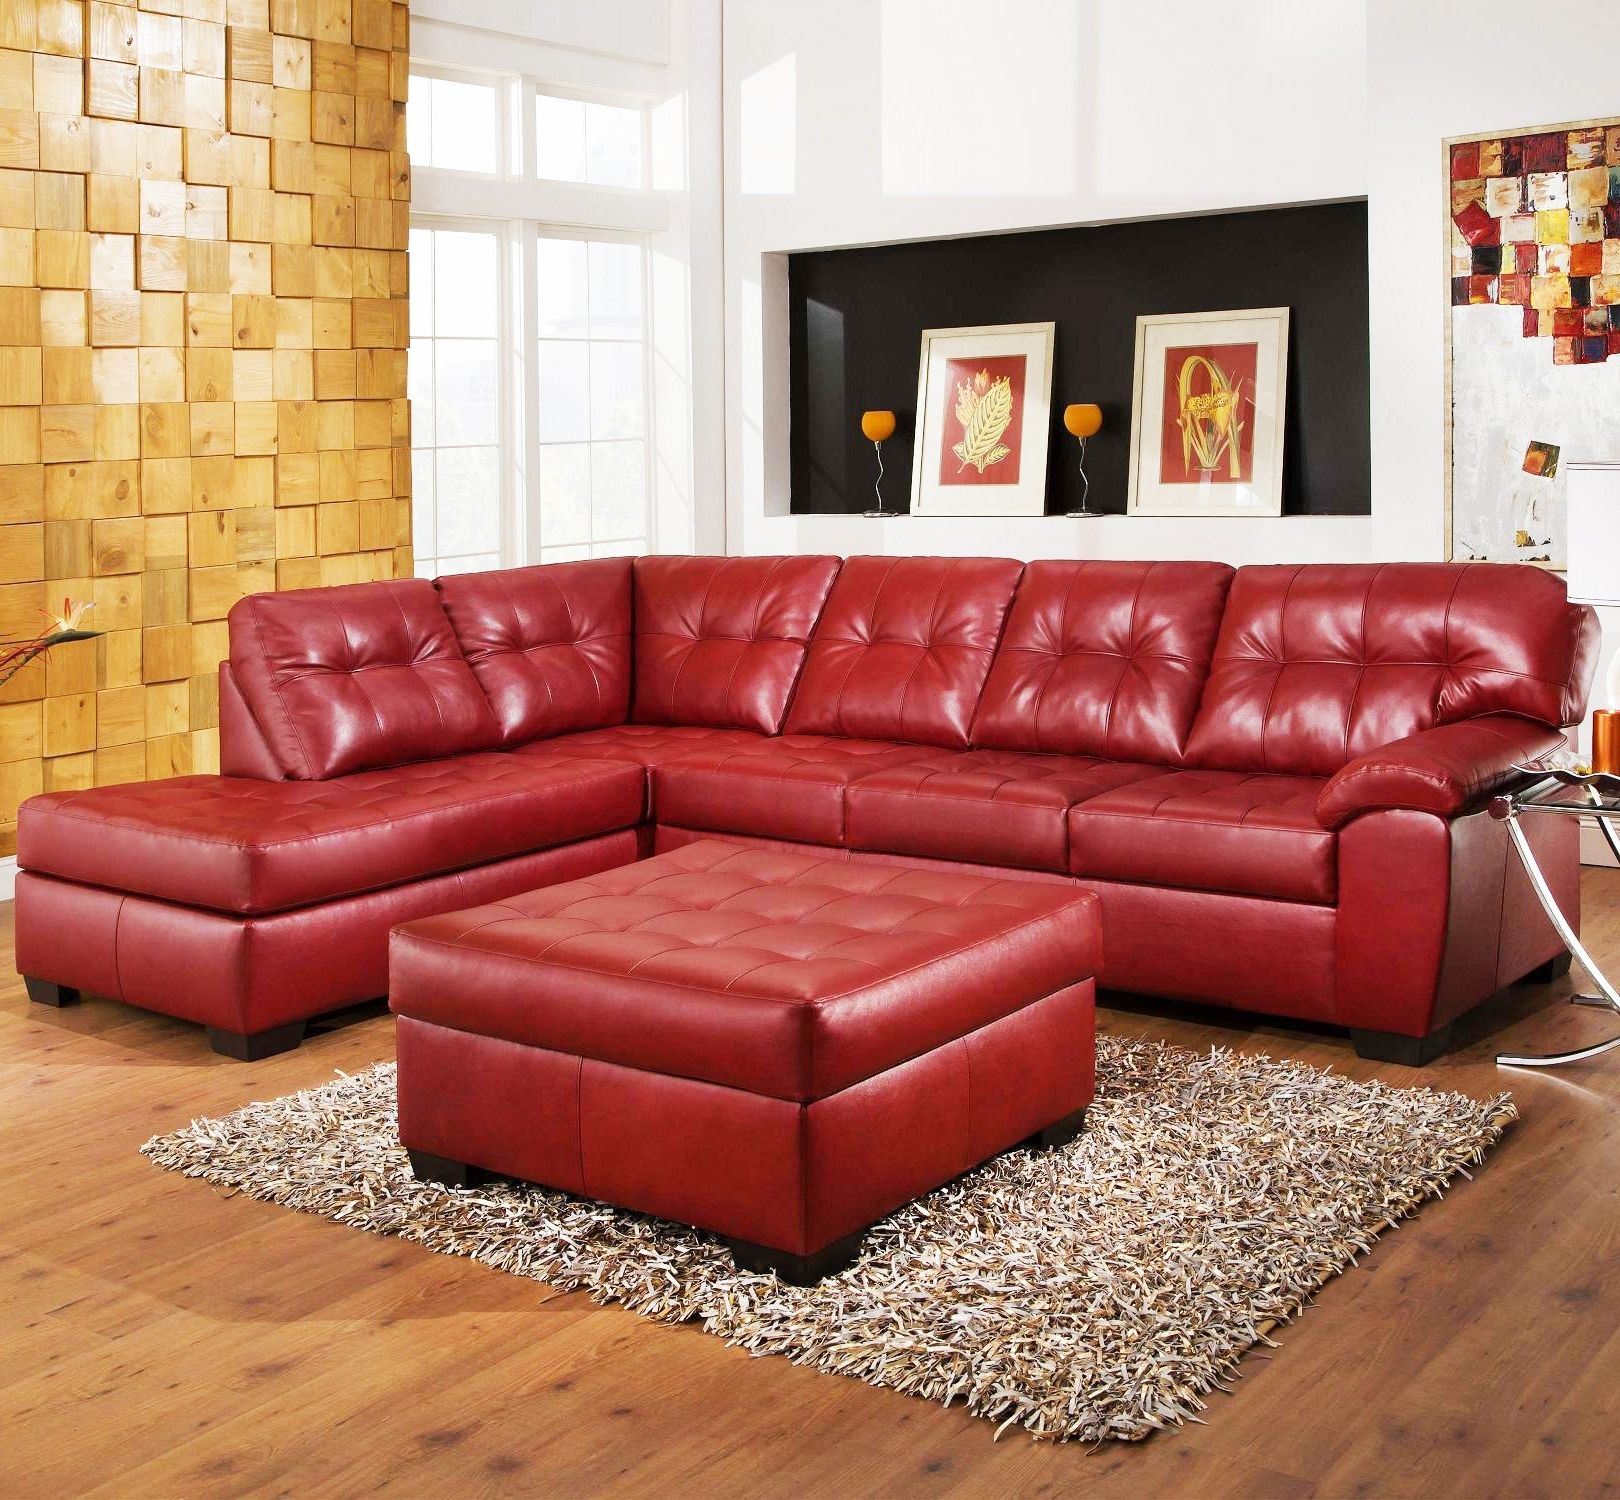 Red Sectional Sofas With Regard To Well Known Sofas : Sectional Couch Small Sectional Couch Red Sectional Couch (View 1 of 20)